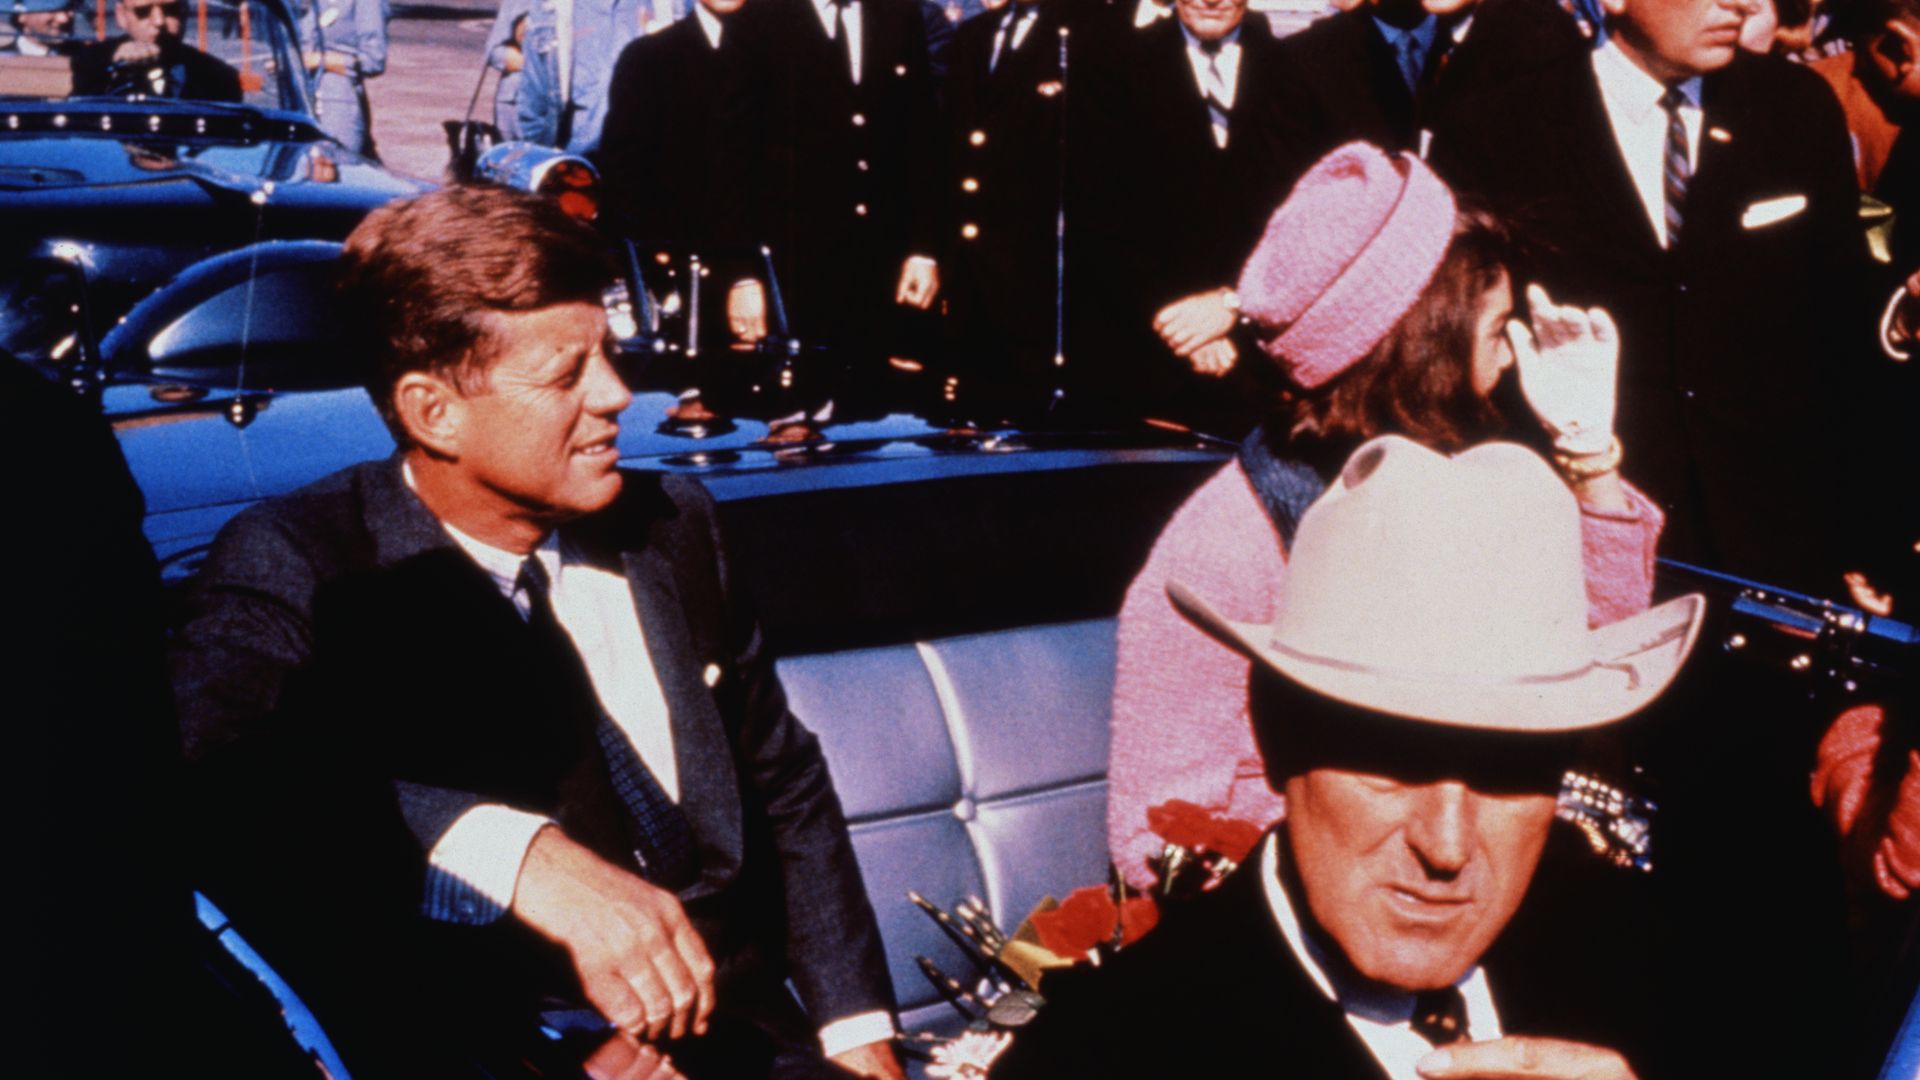 Texas Governor John Connally adjusts his tie (foreground) as President and Mrs. Kennedy, in a pink outfit, settled in rear seats.